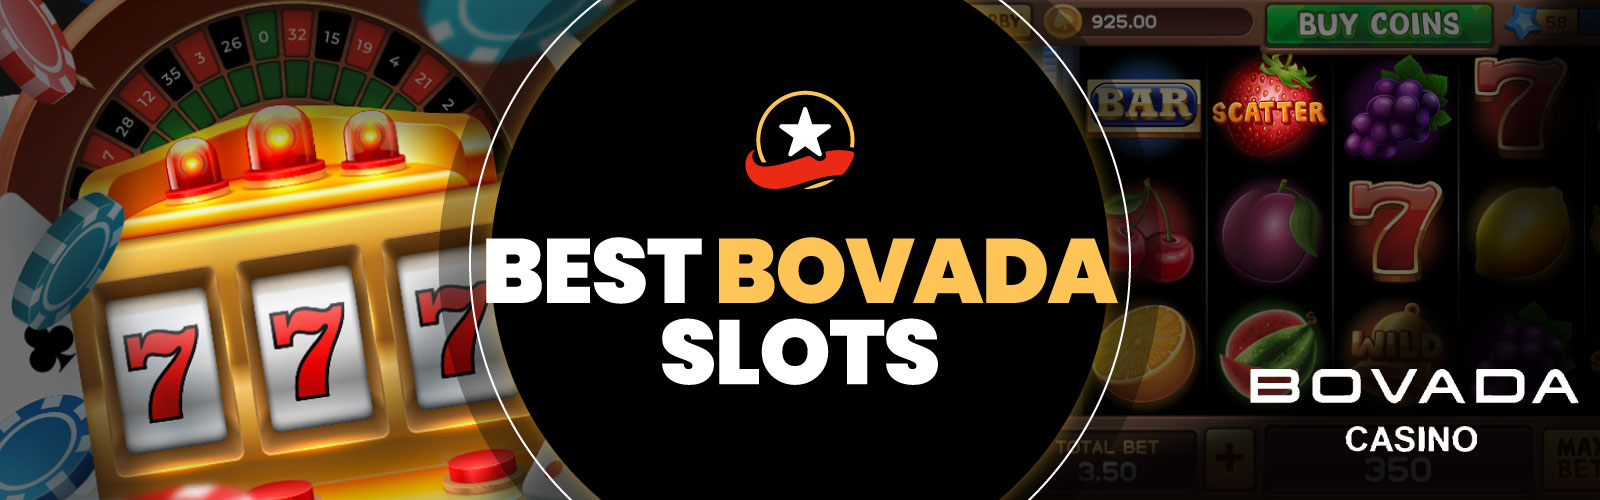 best casino games on bovada